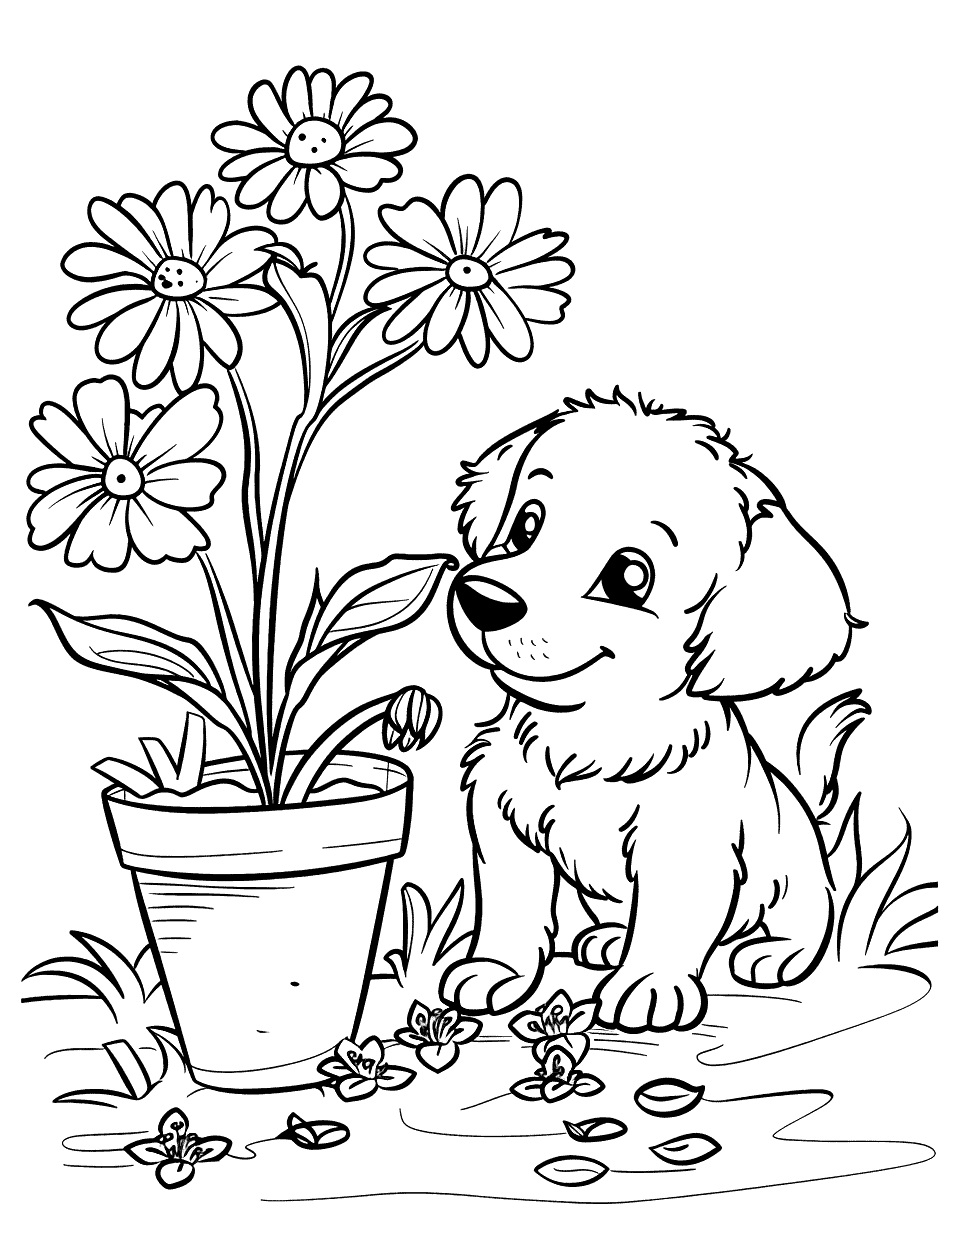 Puppy in a Playful Pose Garden Coloring Page - A puppy playfully looks curiously at a flower pot in the backyard.